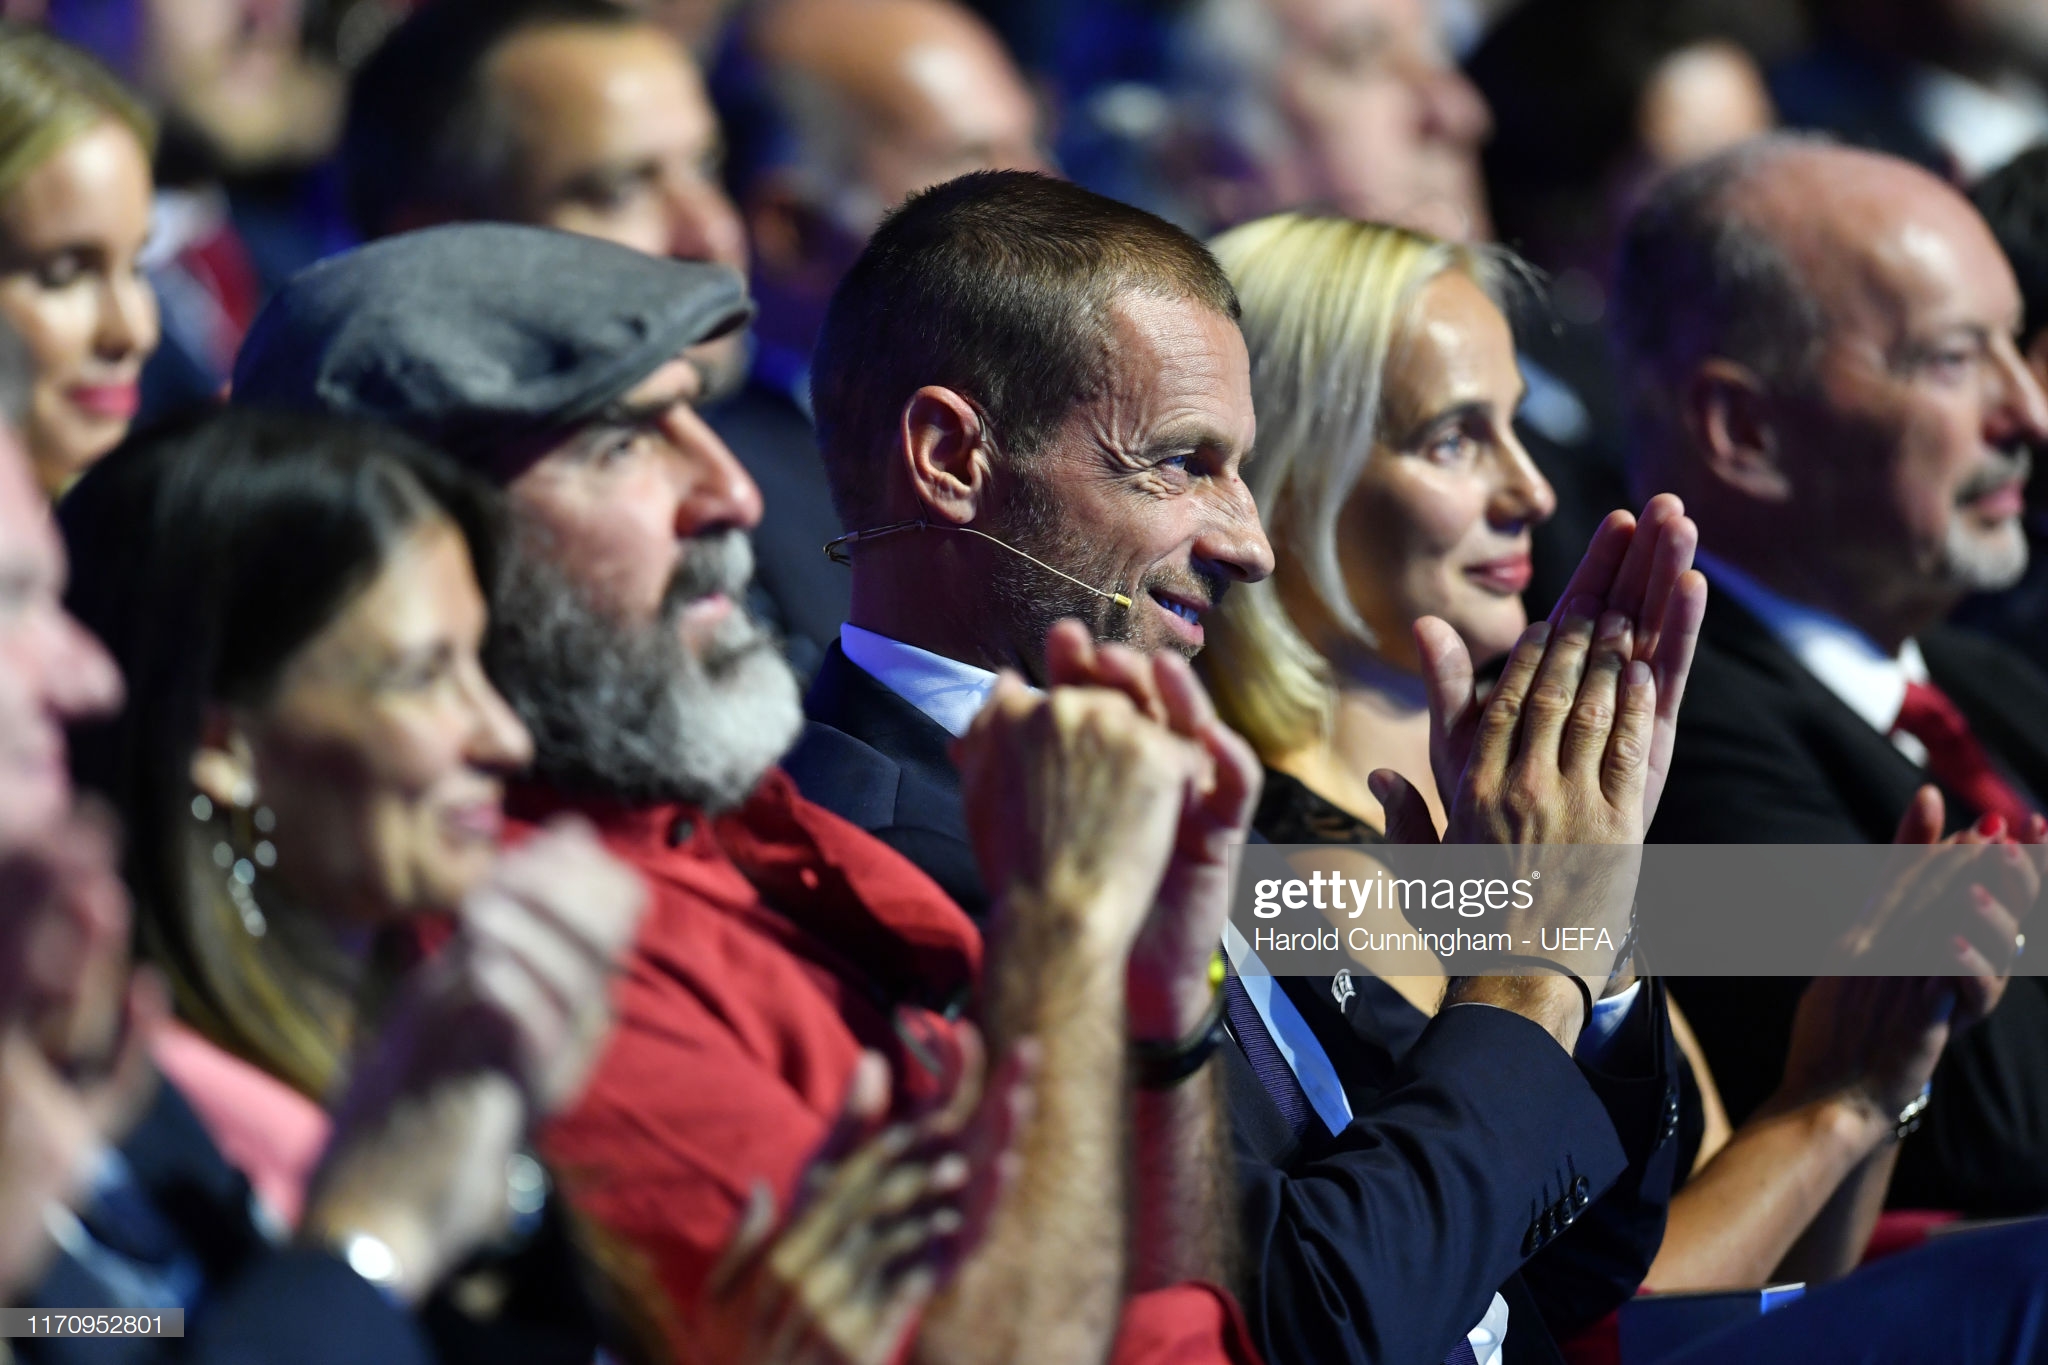 gettyimages-1170952801-2048x2048.jpg